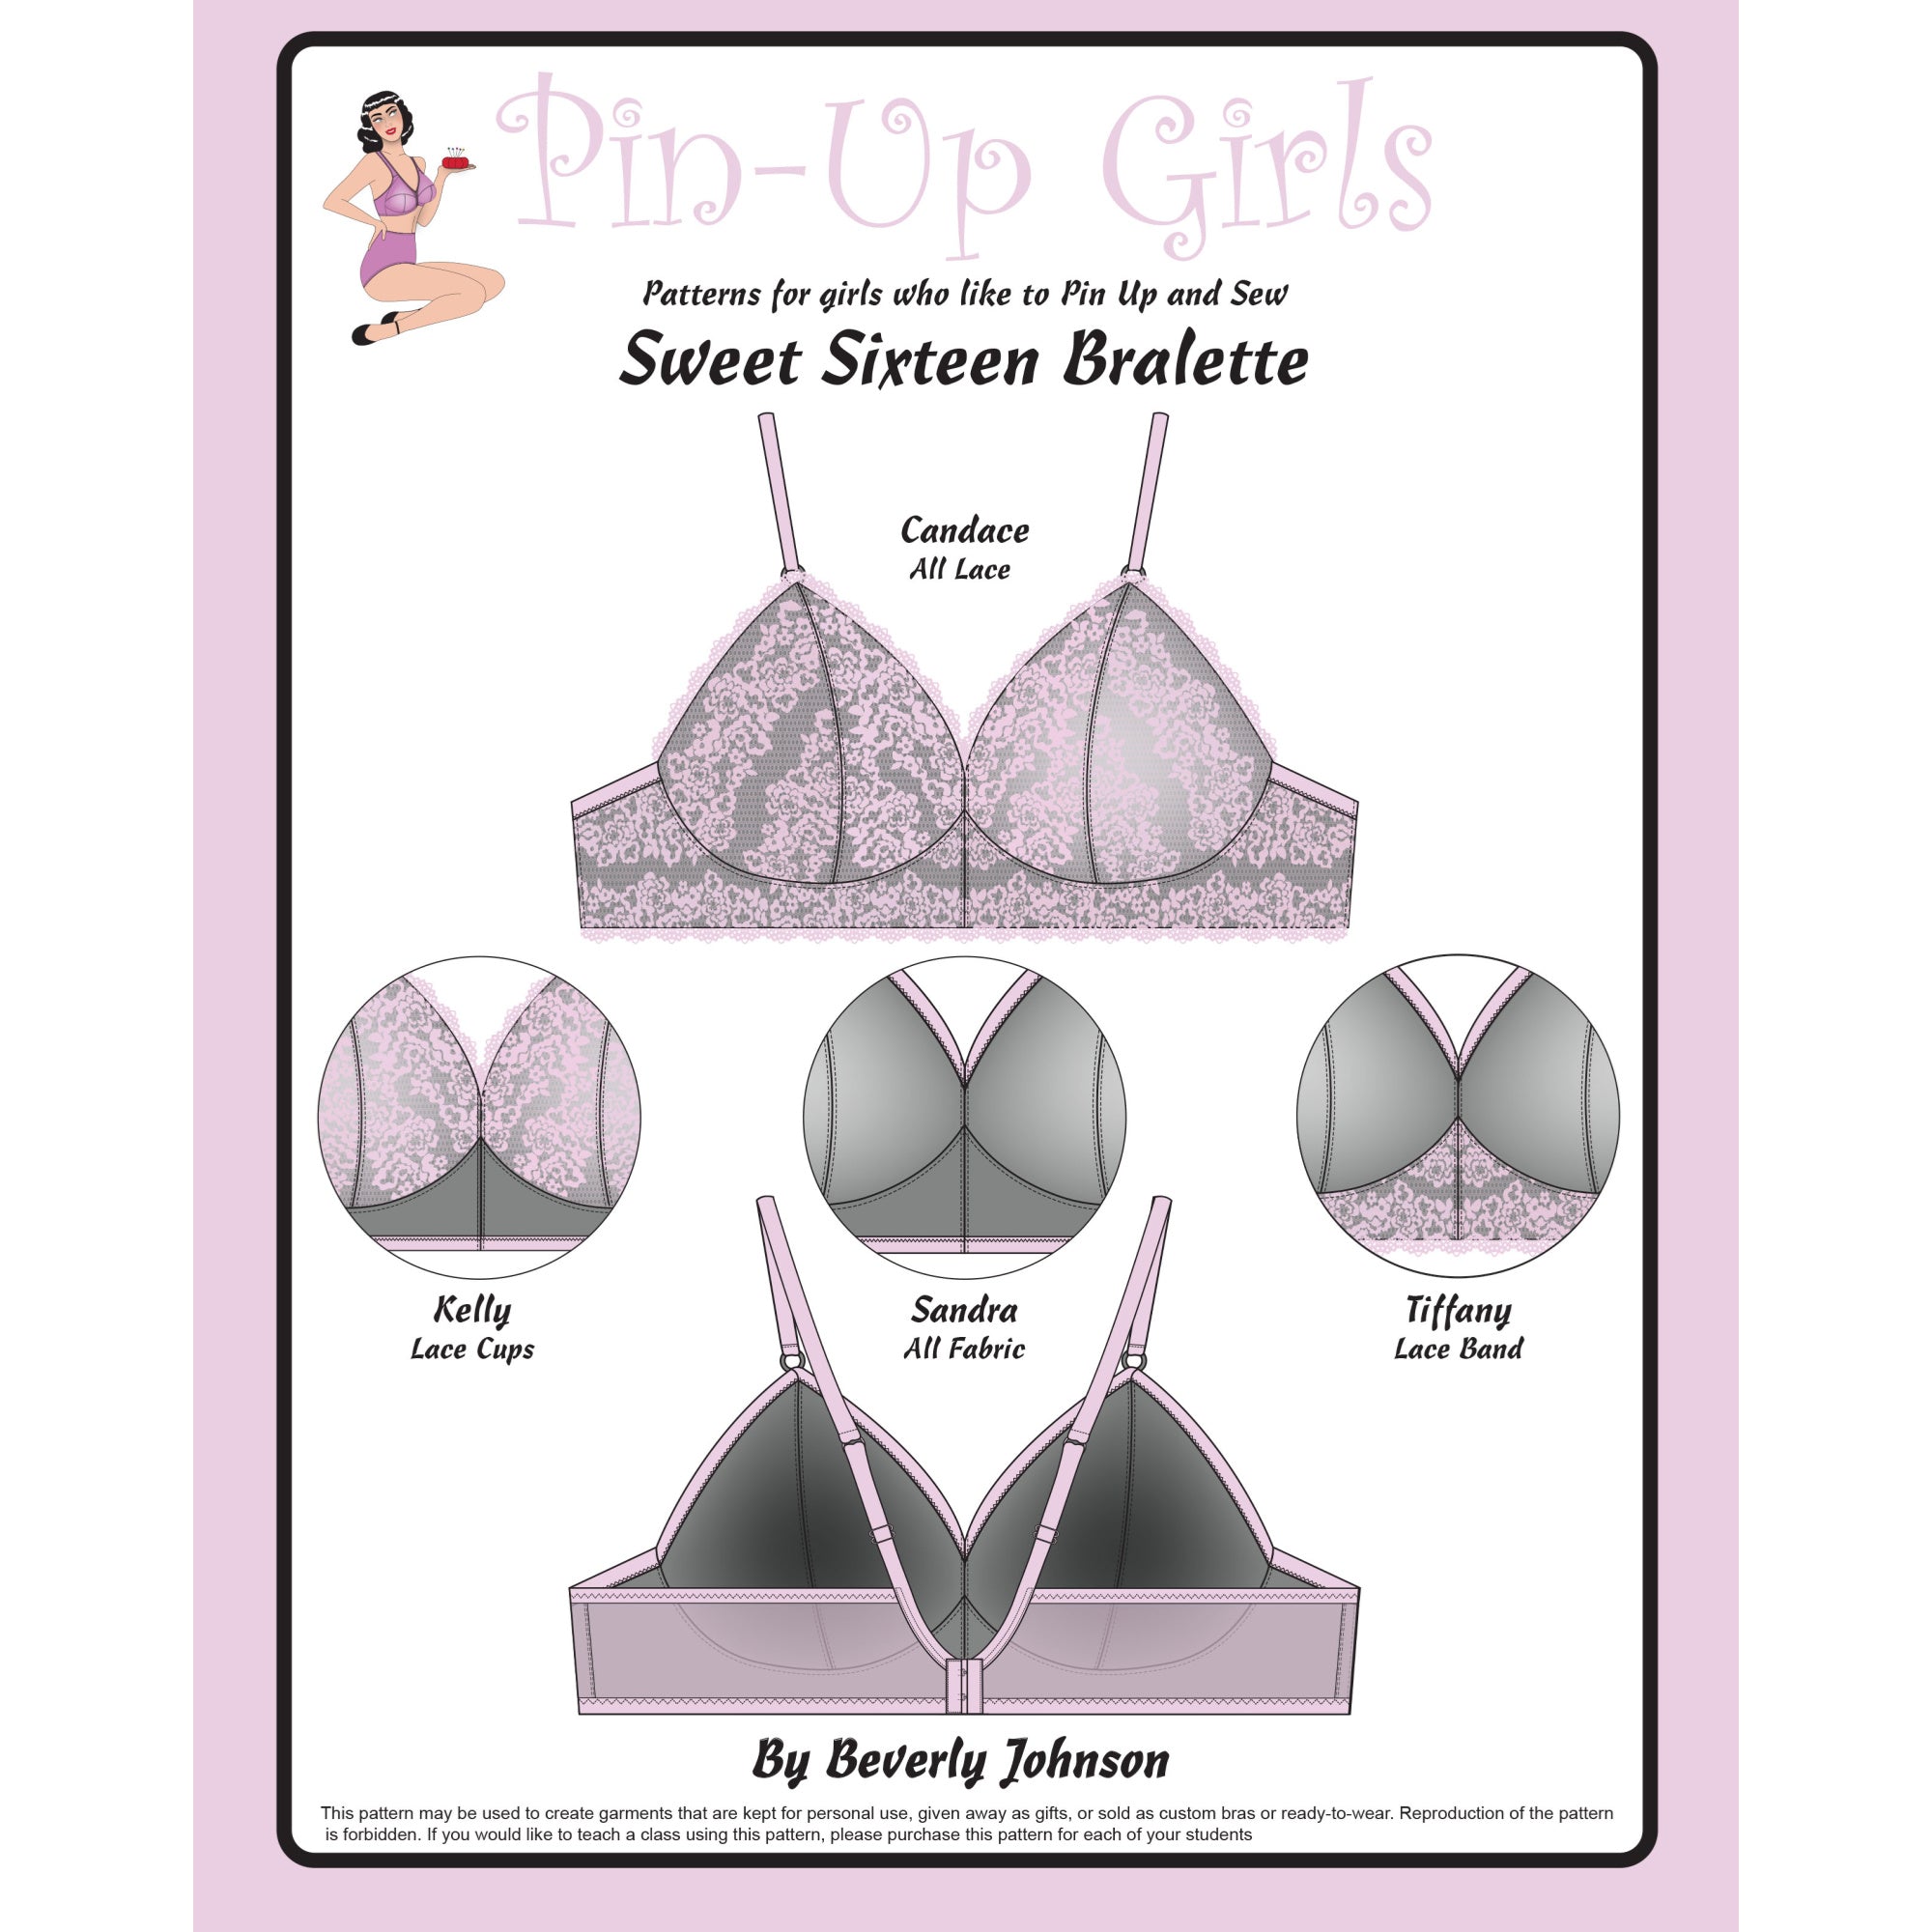 Fabrics with Spandex - great selection - Bra-Makers Supply